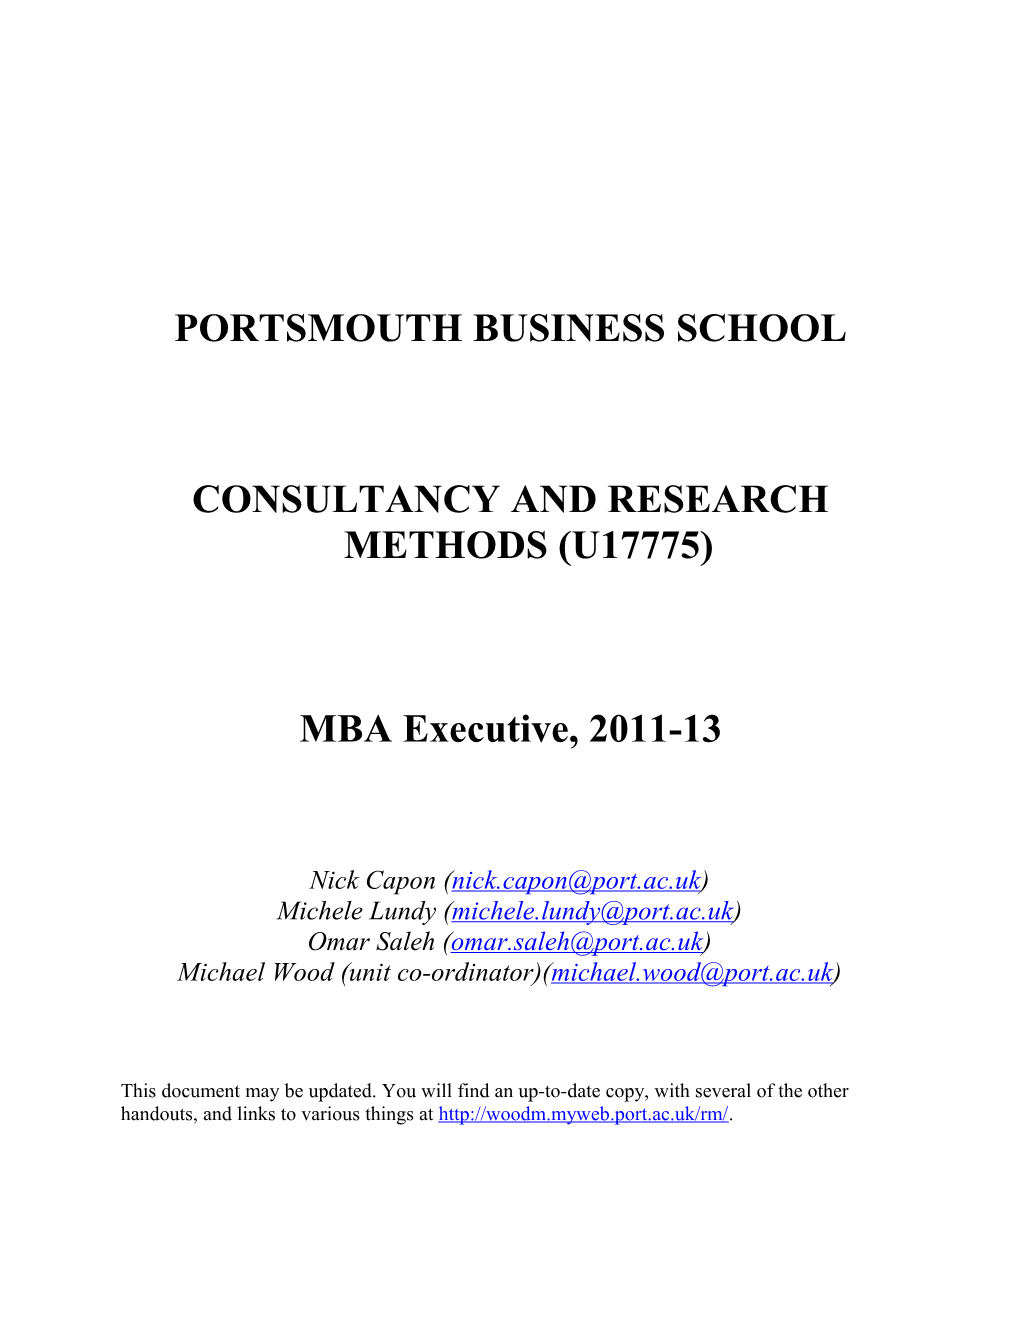 Consultancy and Research Methods (U17775)